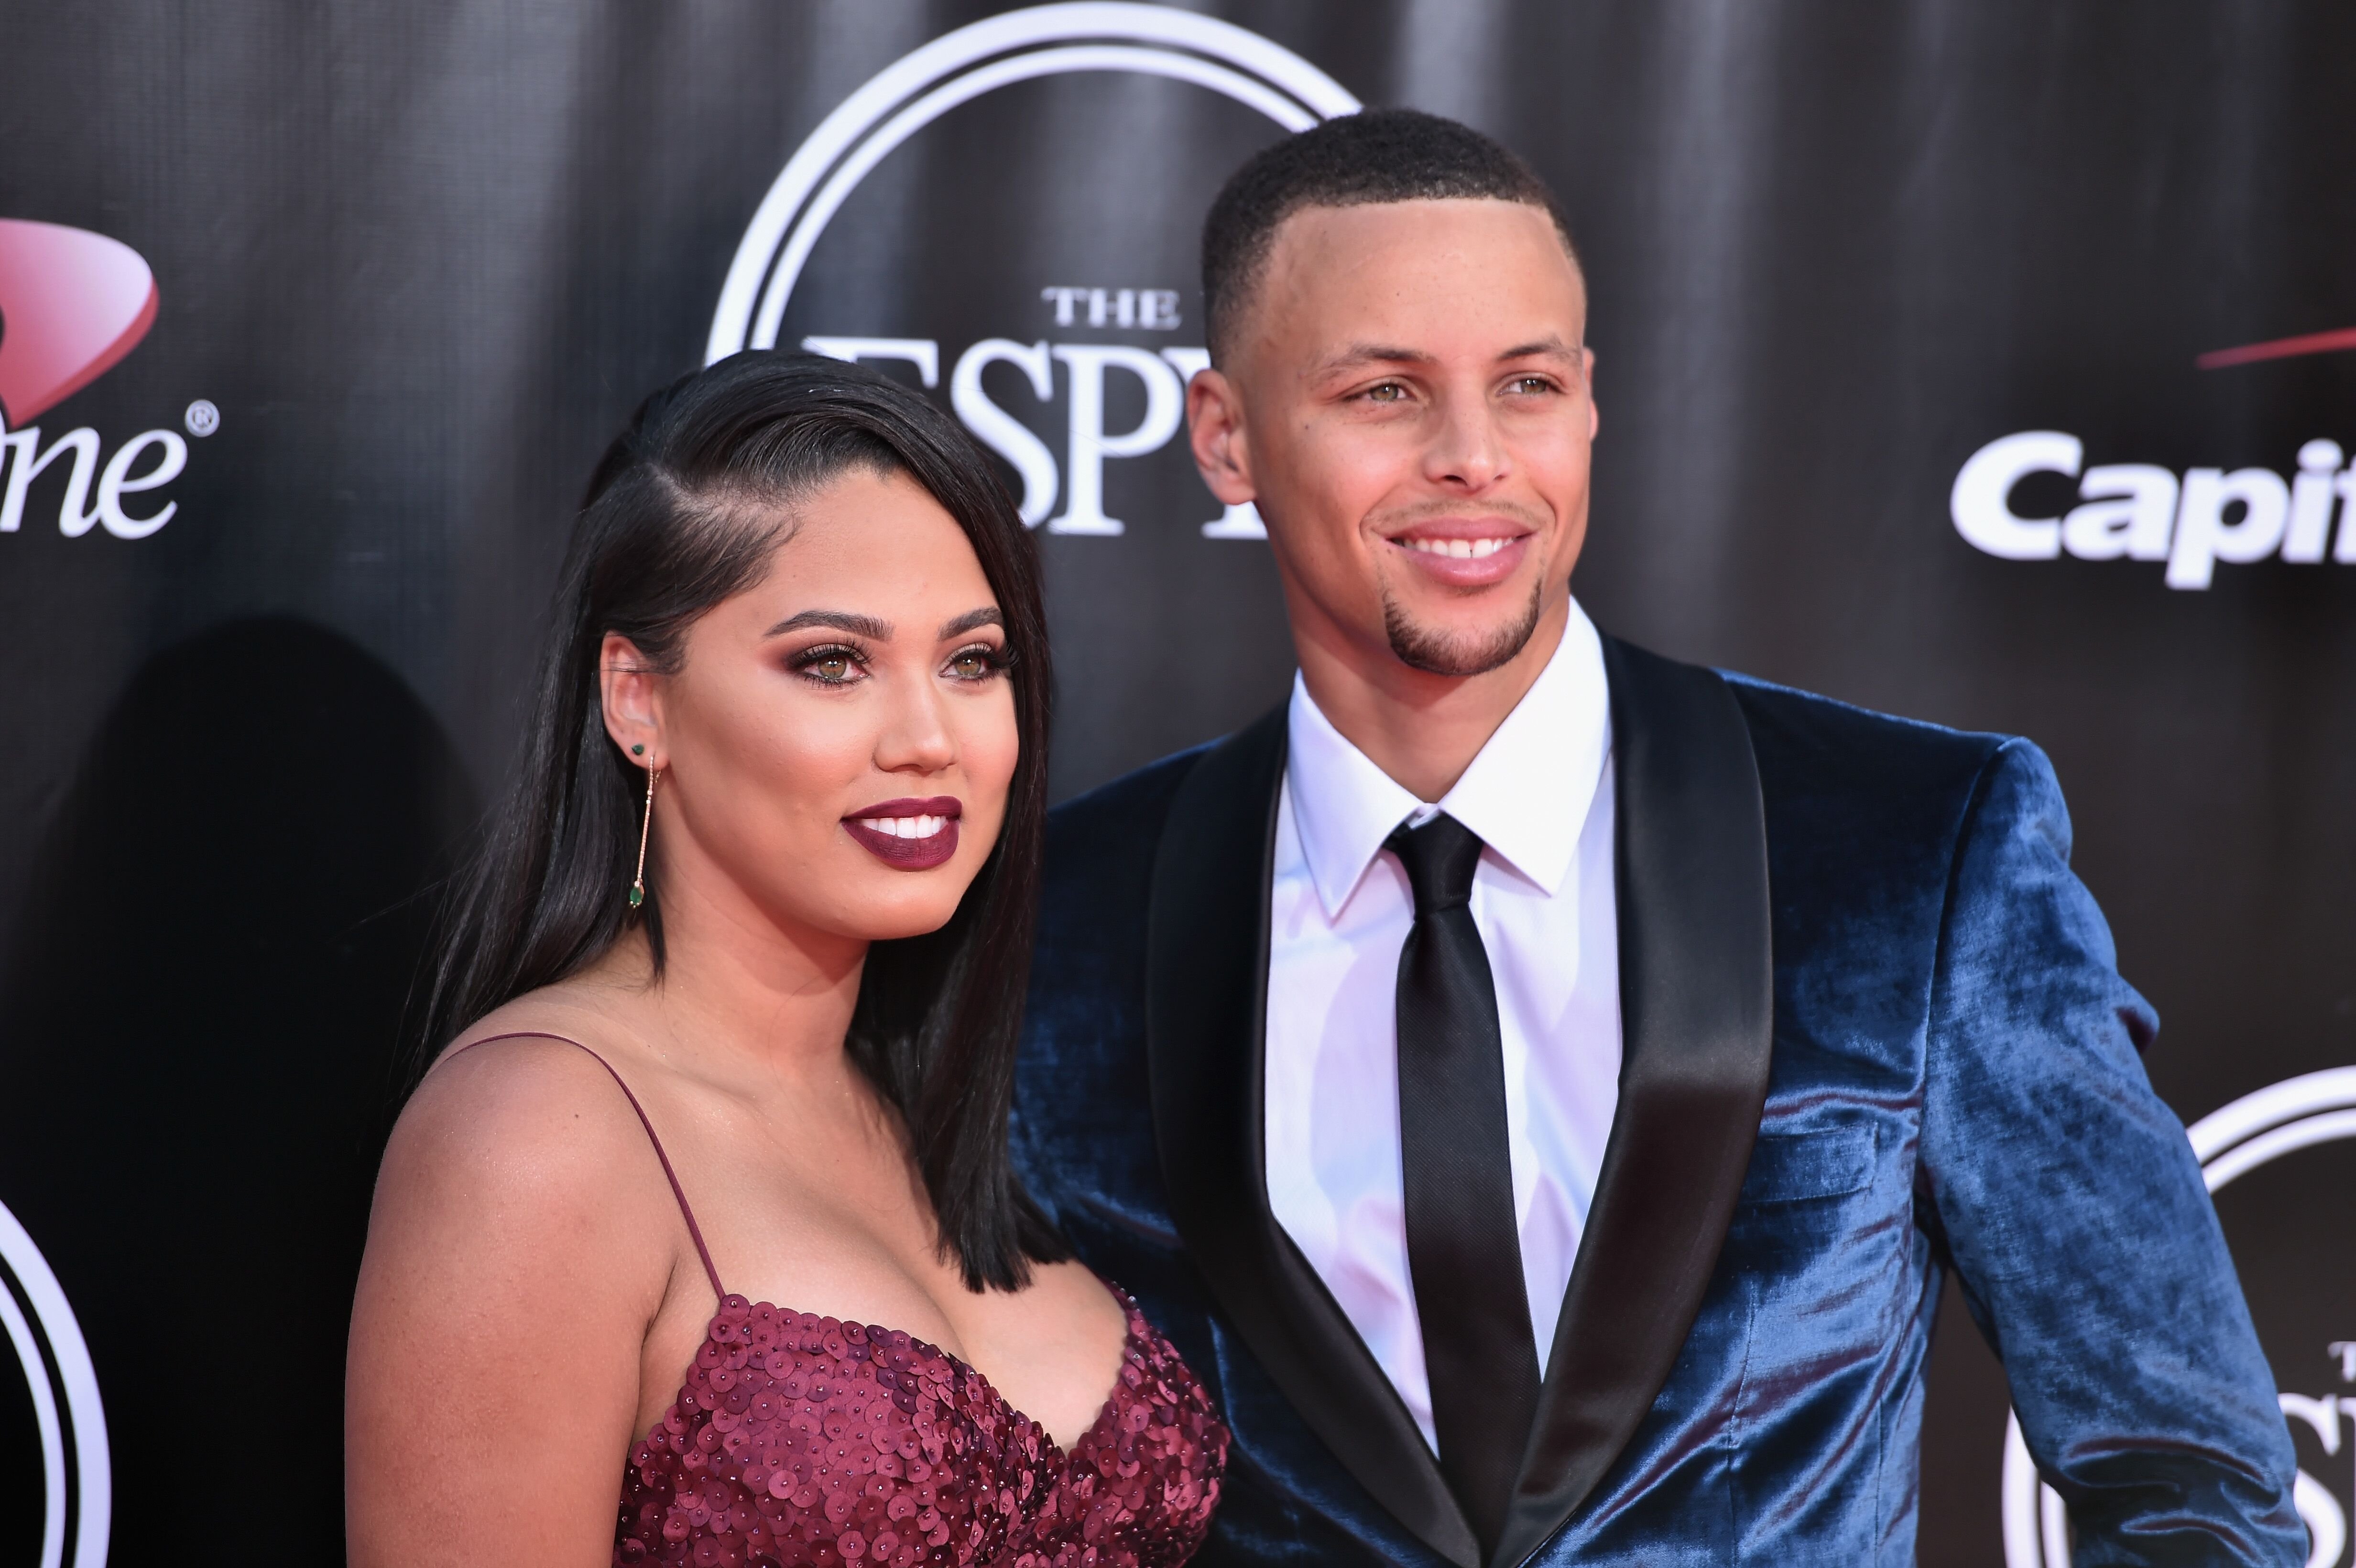 NBA star Stephen Curry and his celebrity chef wife Ayesha Curry at the 2016 ESPYS in Los Angeles/ Source: Getty Images